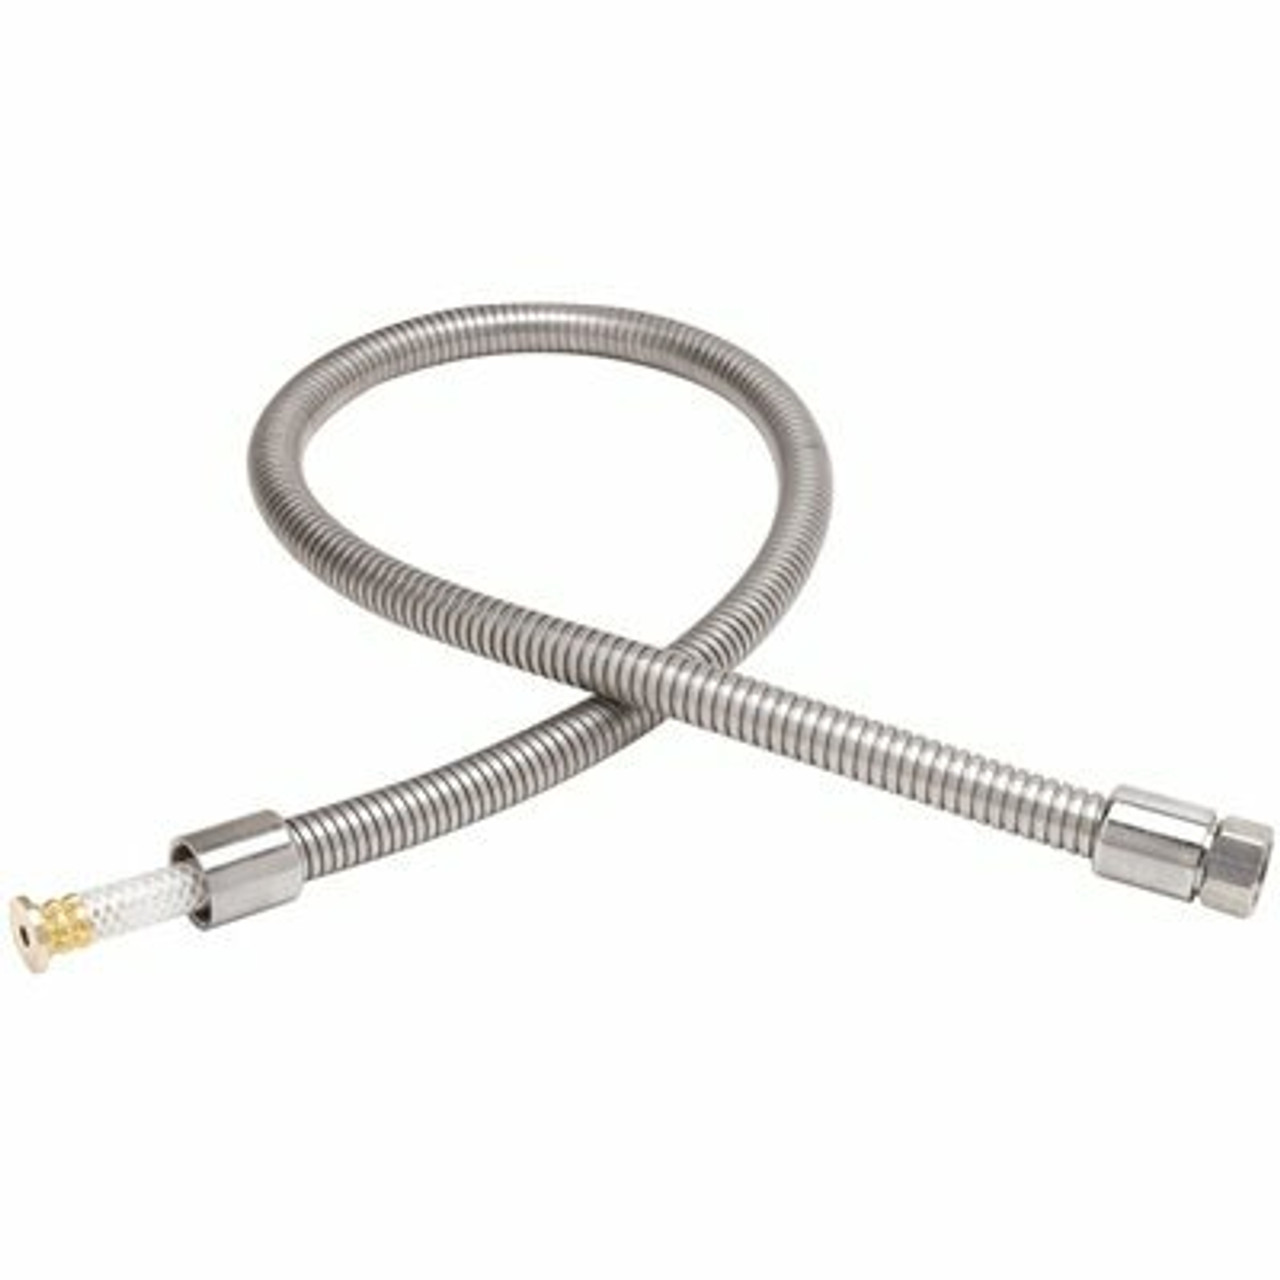 T&S Stainless Steel Pull Out Sprayer Hose With No Heat Resistant Handle